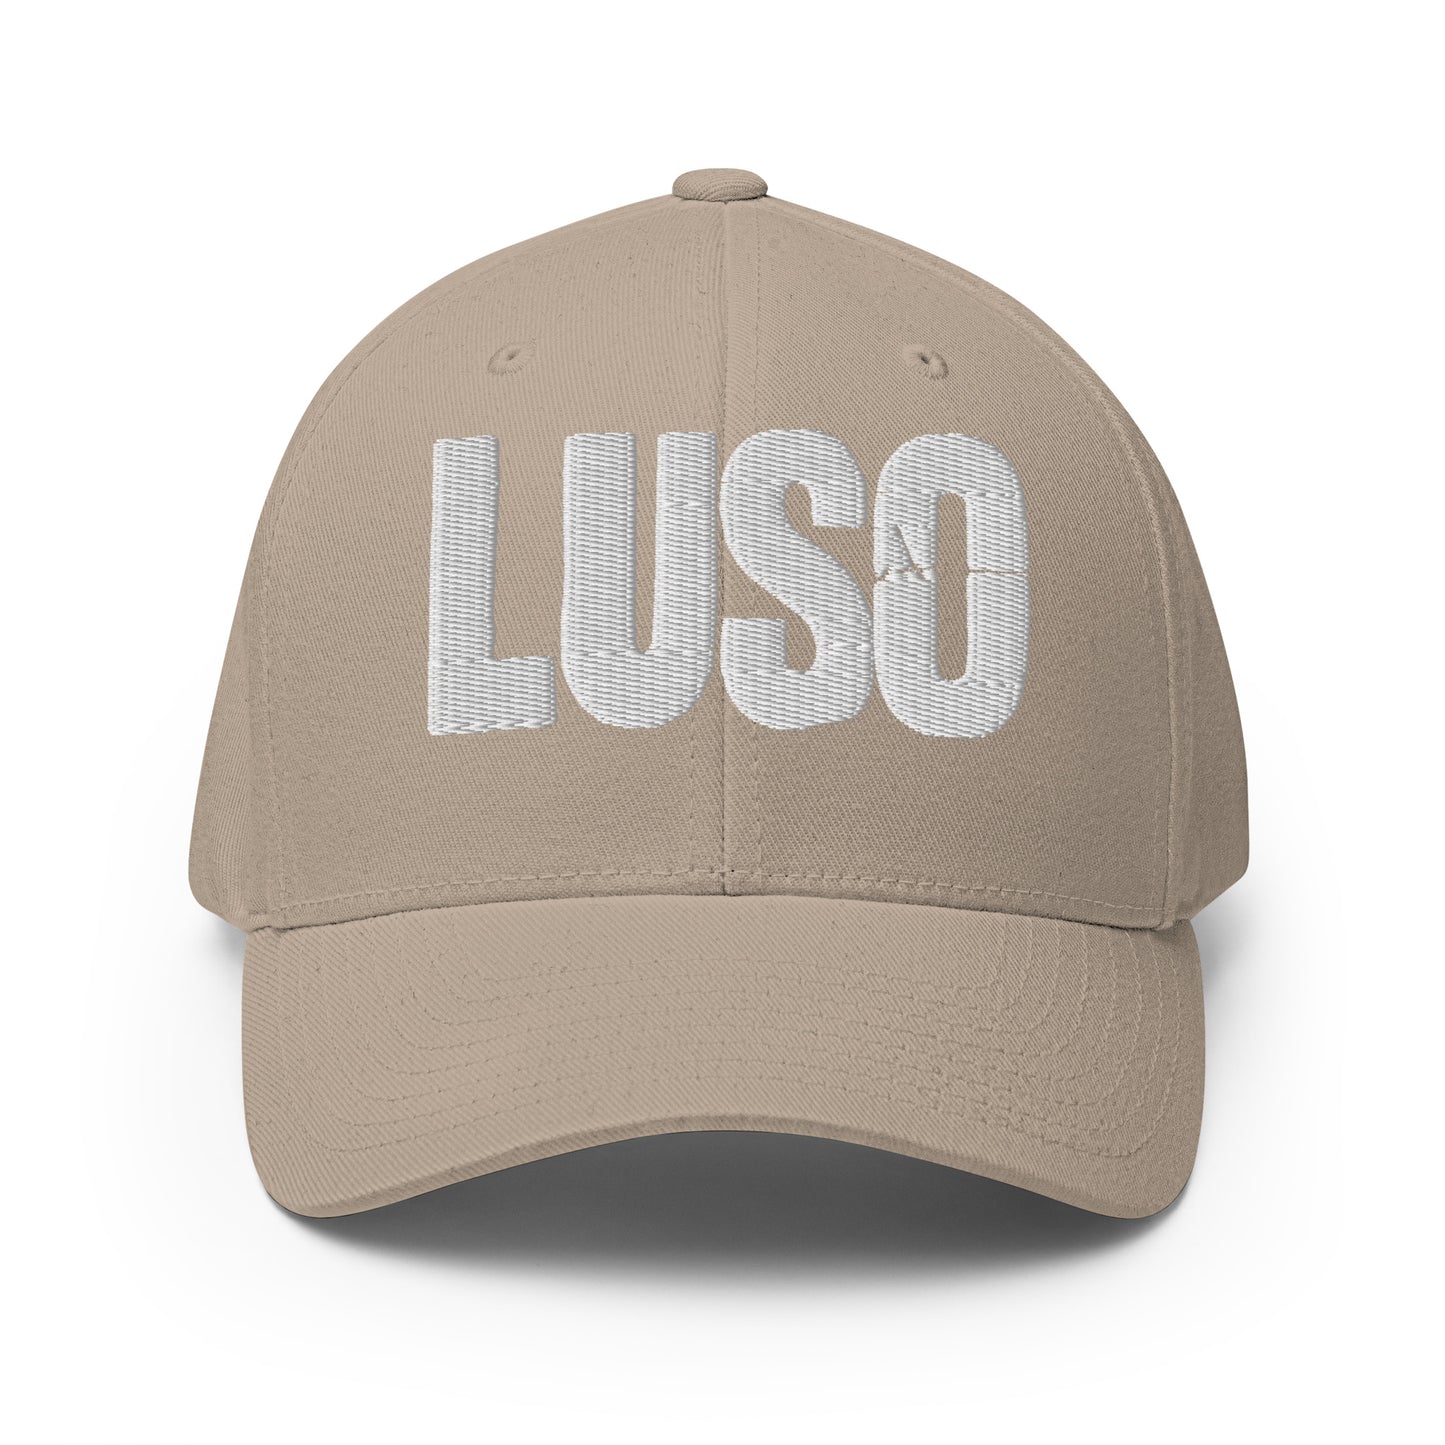 LUSO Puff Embroidered Structured Twill Cap